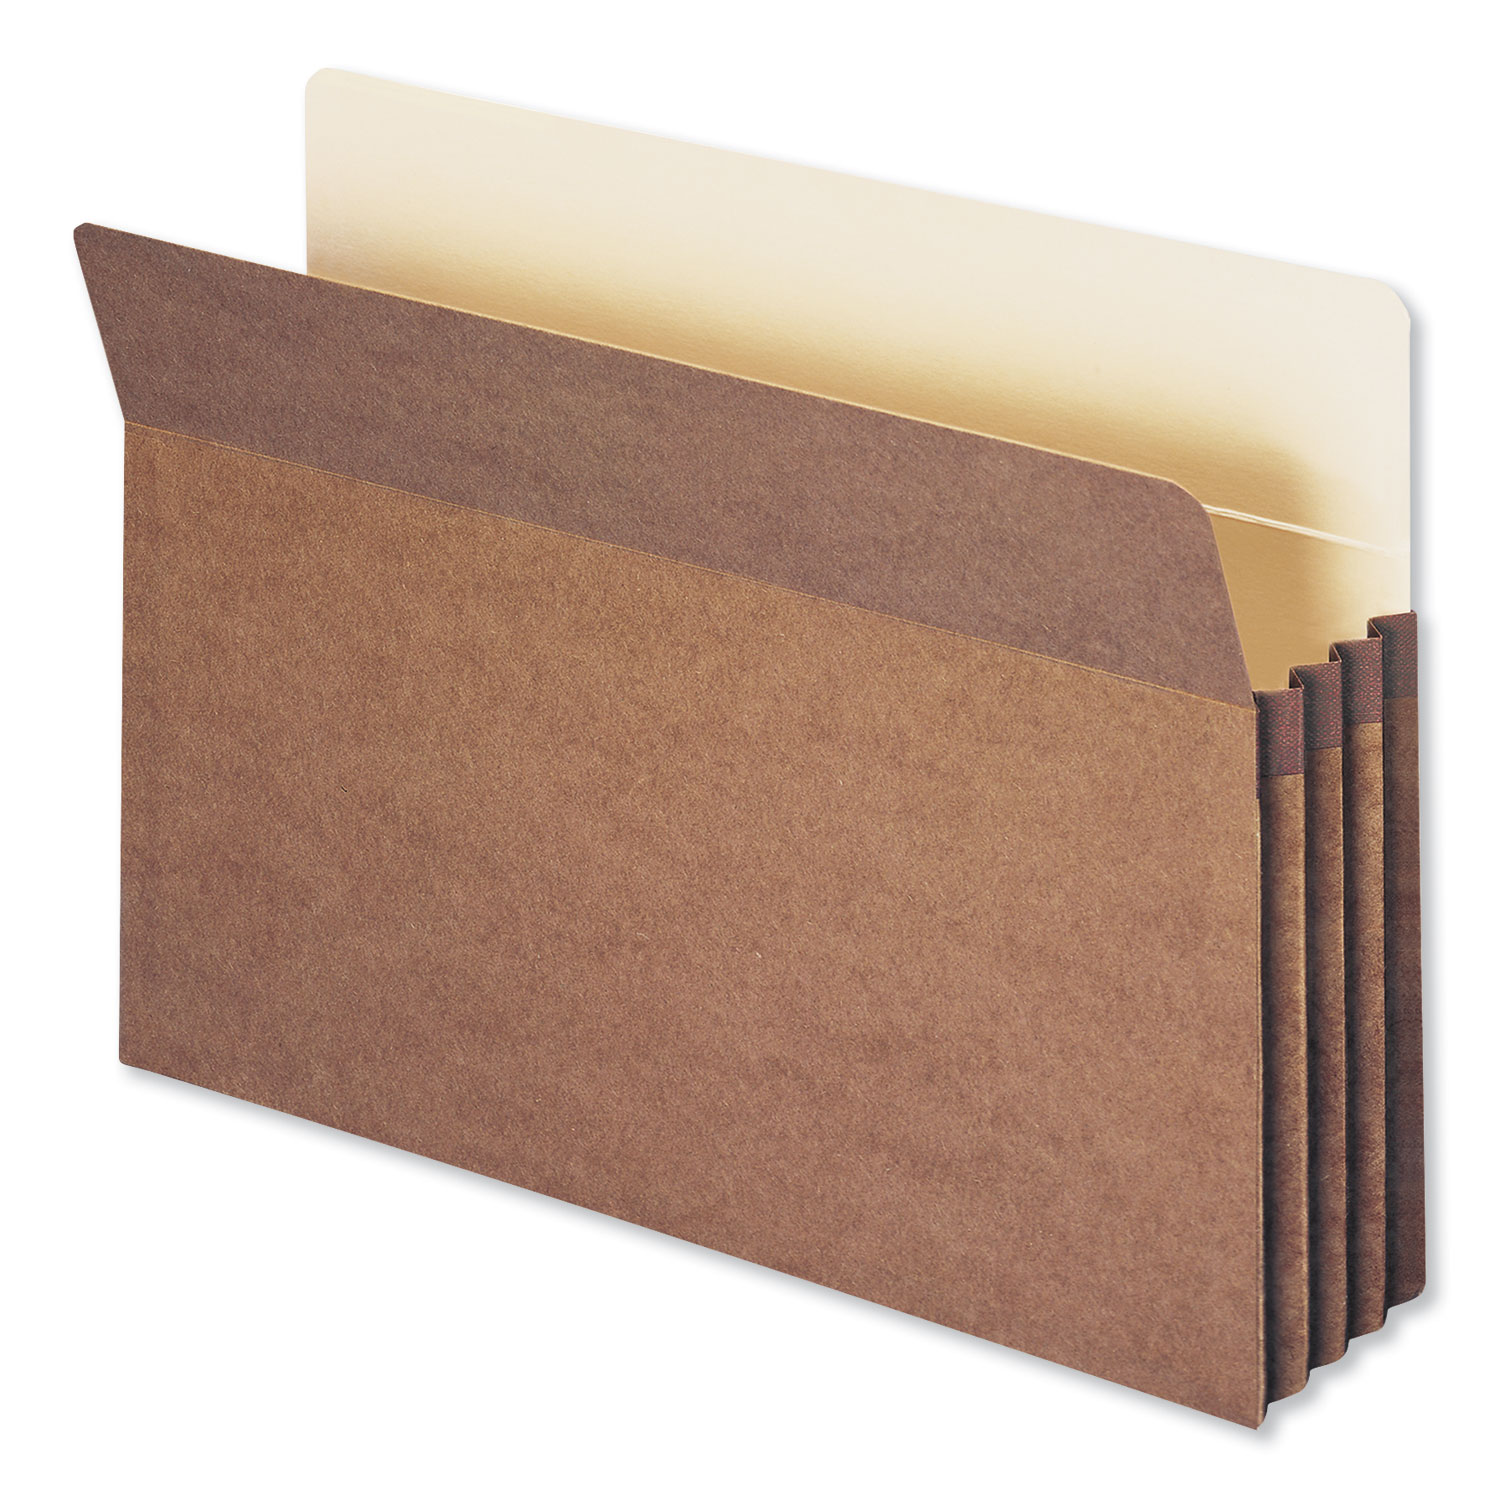  Smead 74805 Redrope Drop Front File Pockets, 3.5 Expansion, Legal Size, Redrope, 50/Box (SMD74805) 